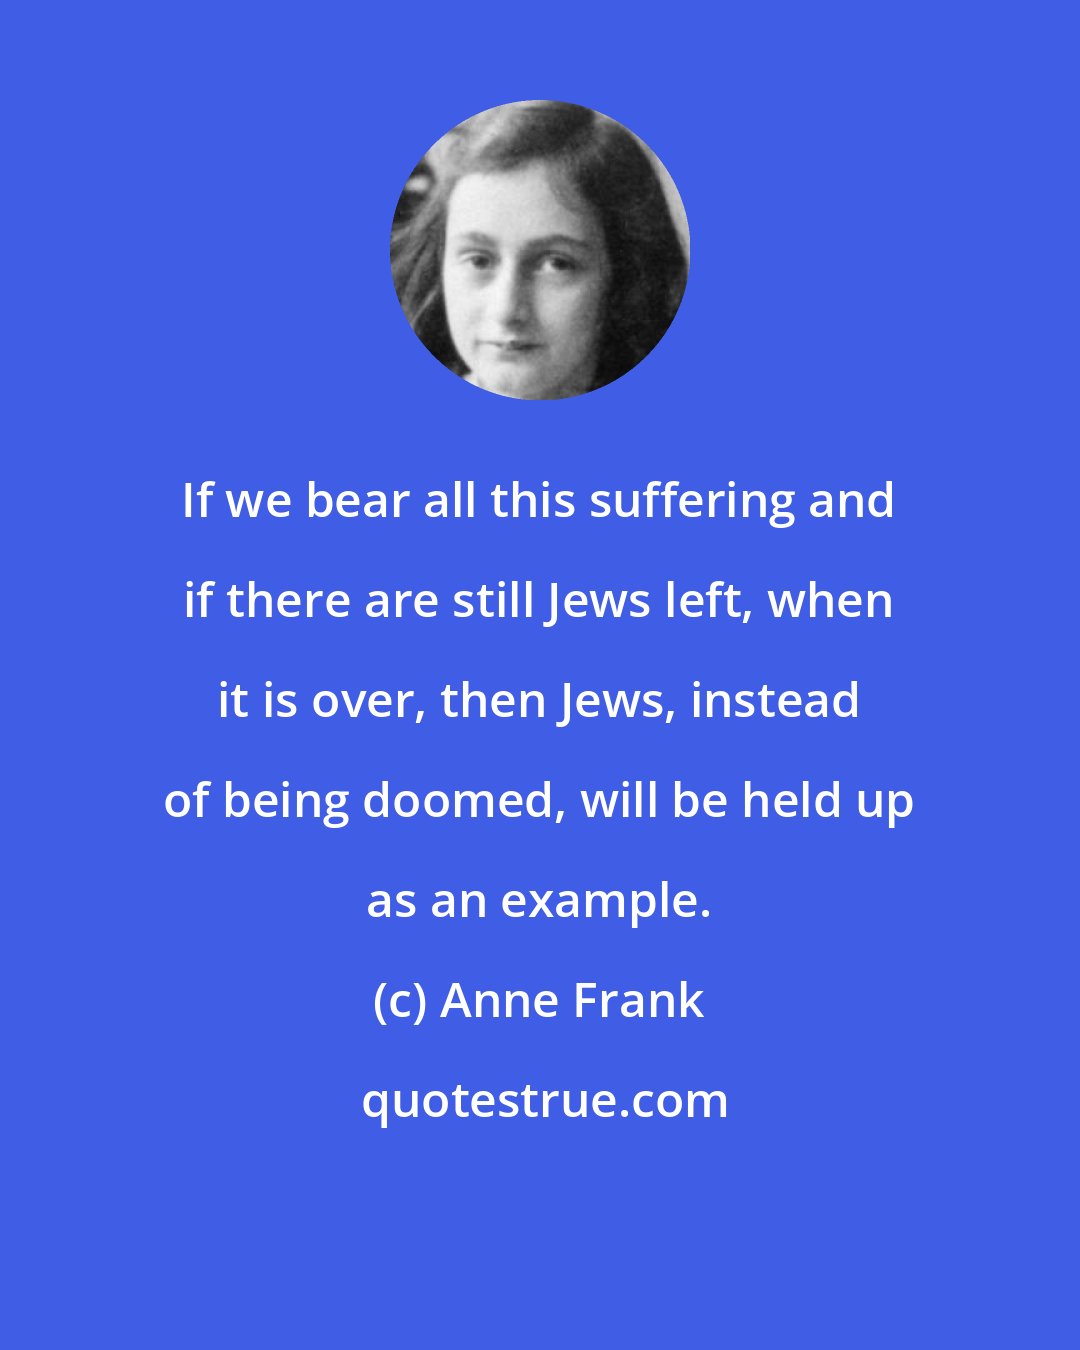 Anne Frank: If we bear all this suffering and if there are still Jews left, when it is over, then Jews, instead of being doomed, will be held up as an example.